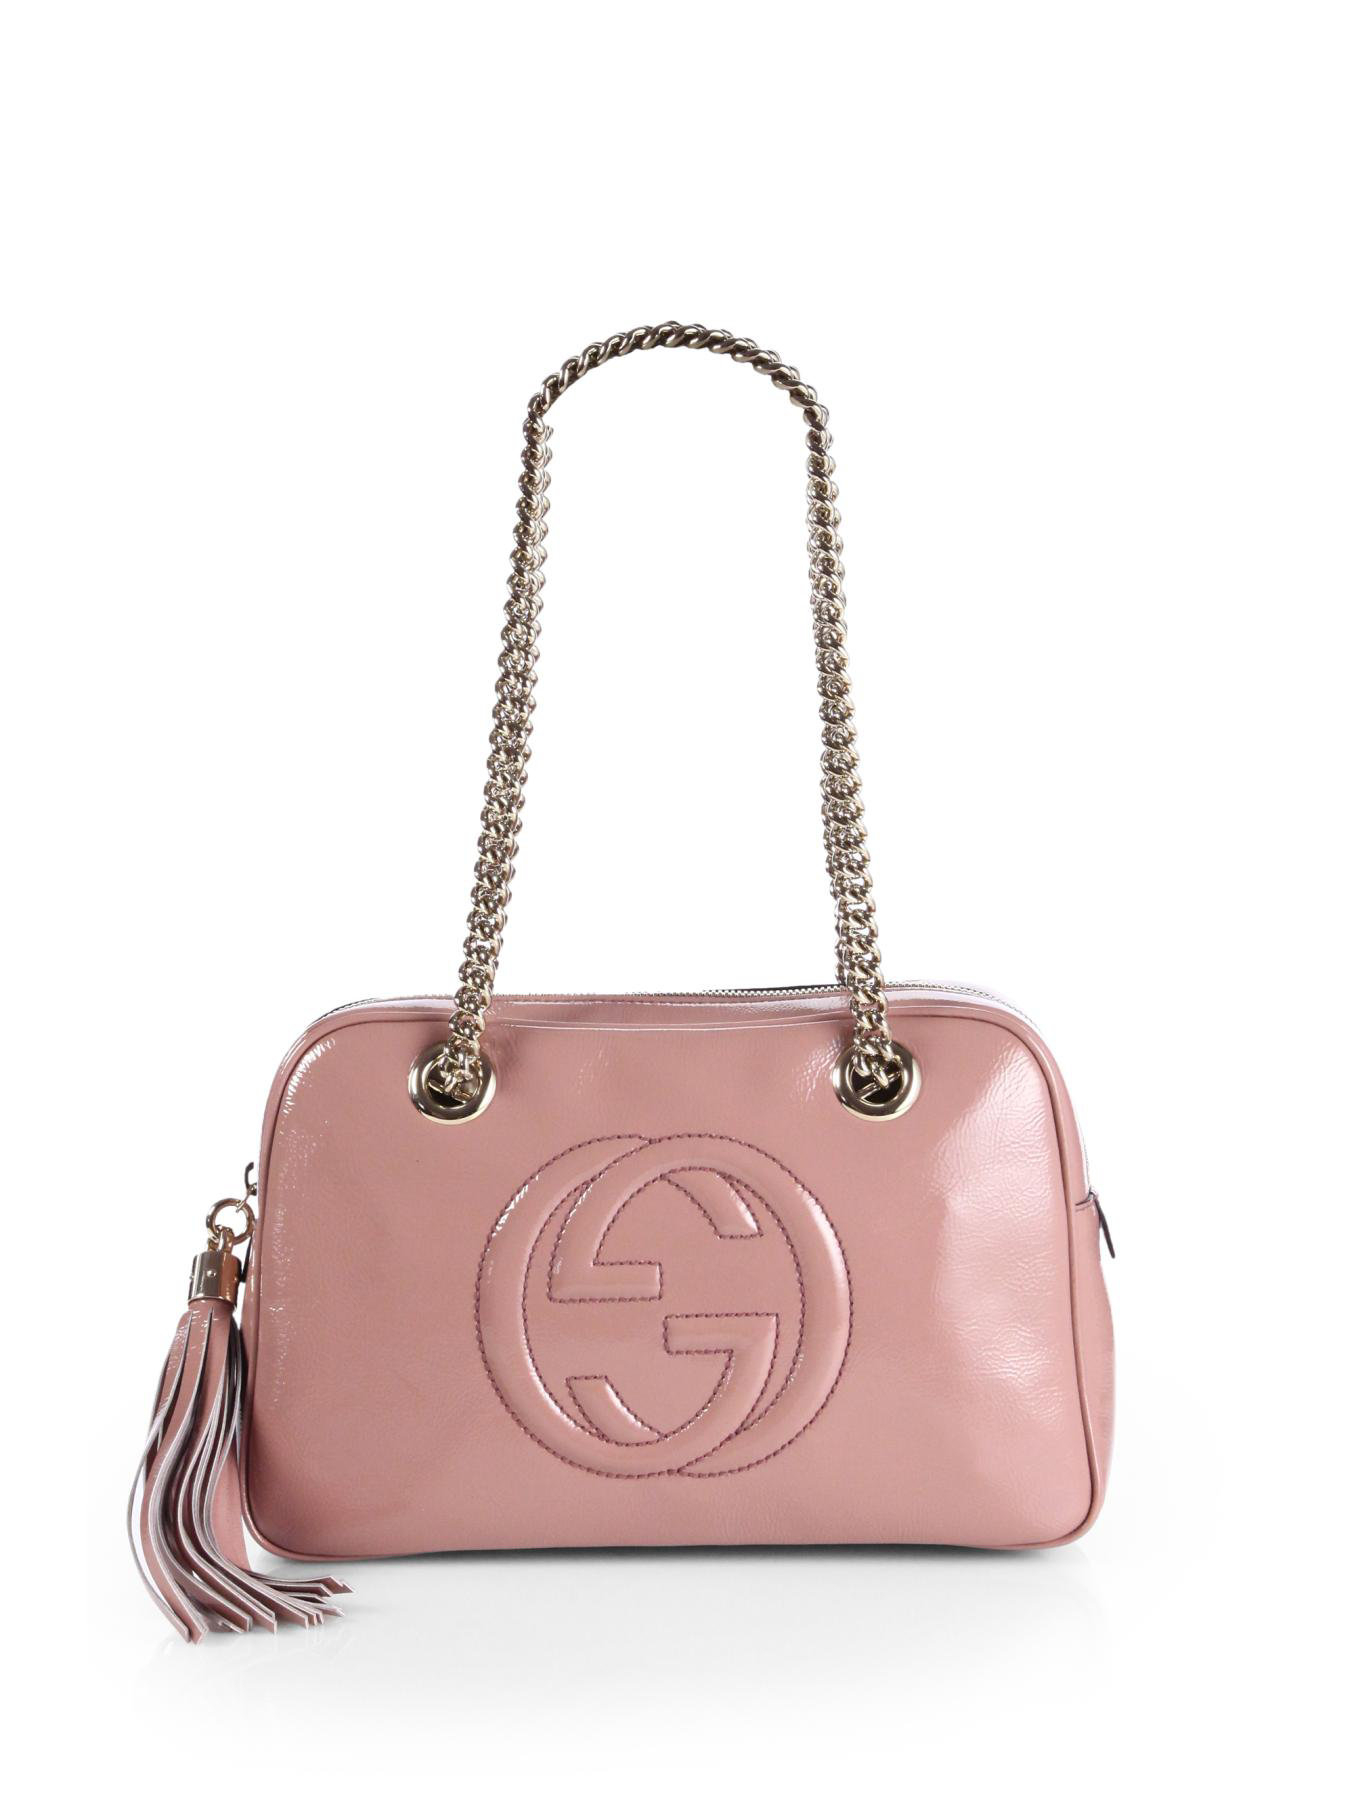 Gucci Soho Patent Leather Shoulder Bag in Pink (BLUSH) | Lyst